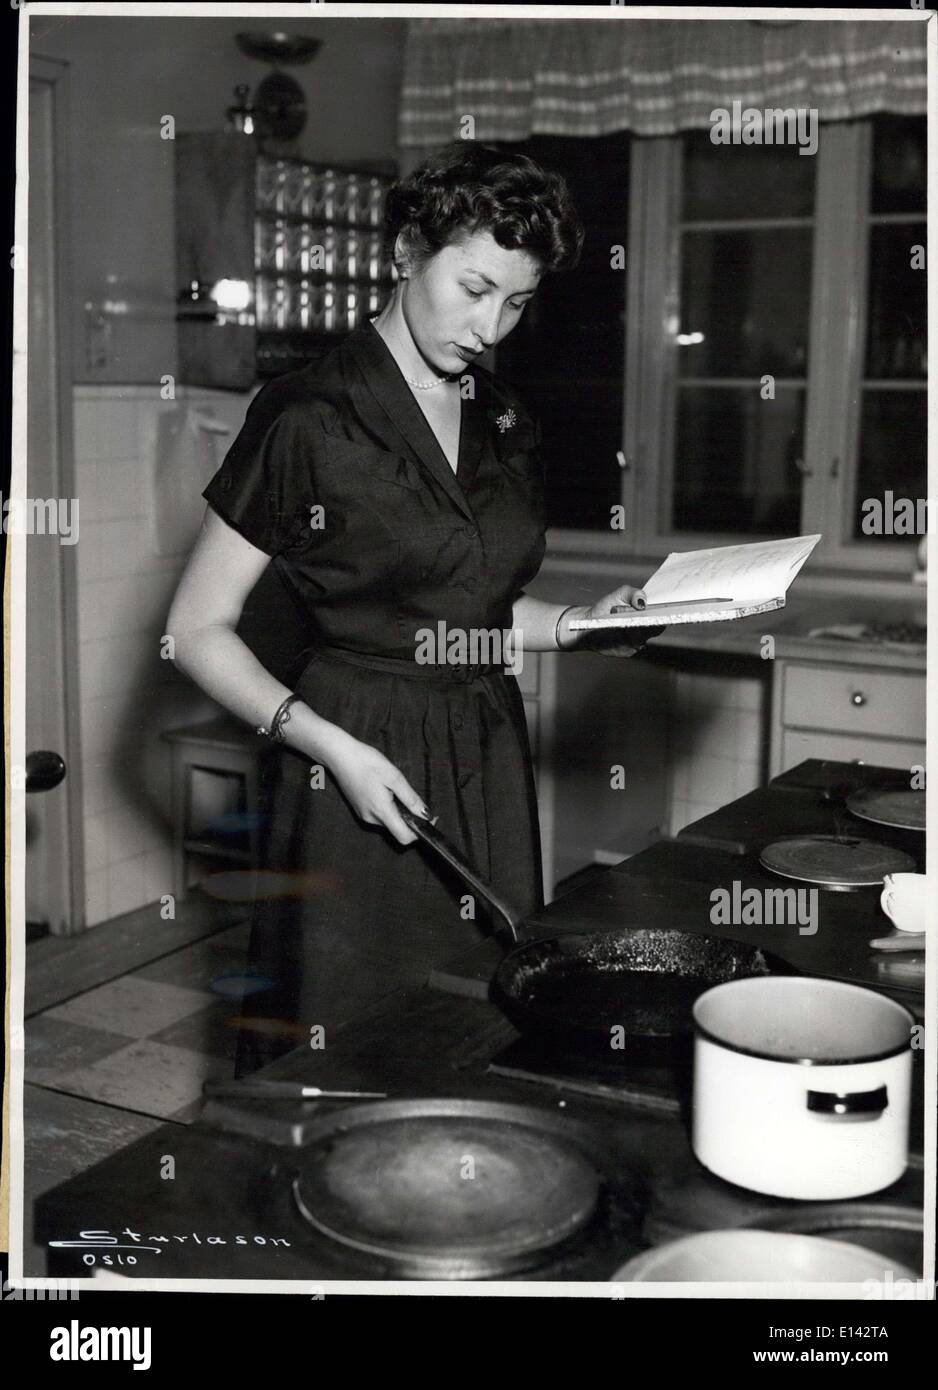 Apr. 04, 2012 - H.R.H. Princess Astrid of Norway, being a clever cook, often prepares small dishes for the Royal Family in the kitchen of H.M. King Olav V residence, Skaugum. Stock Photo